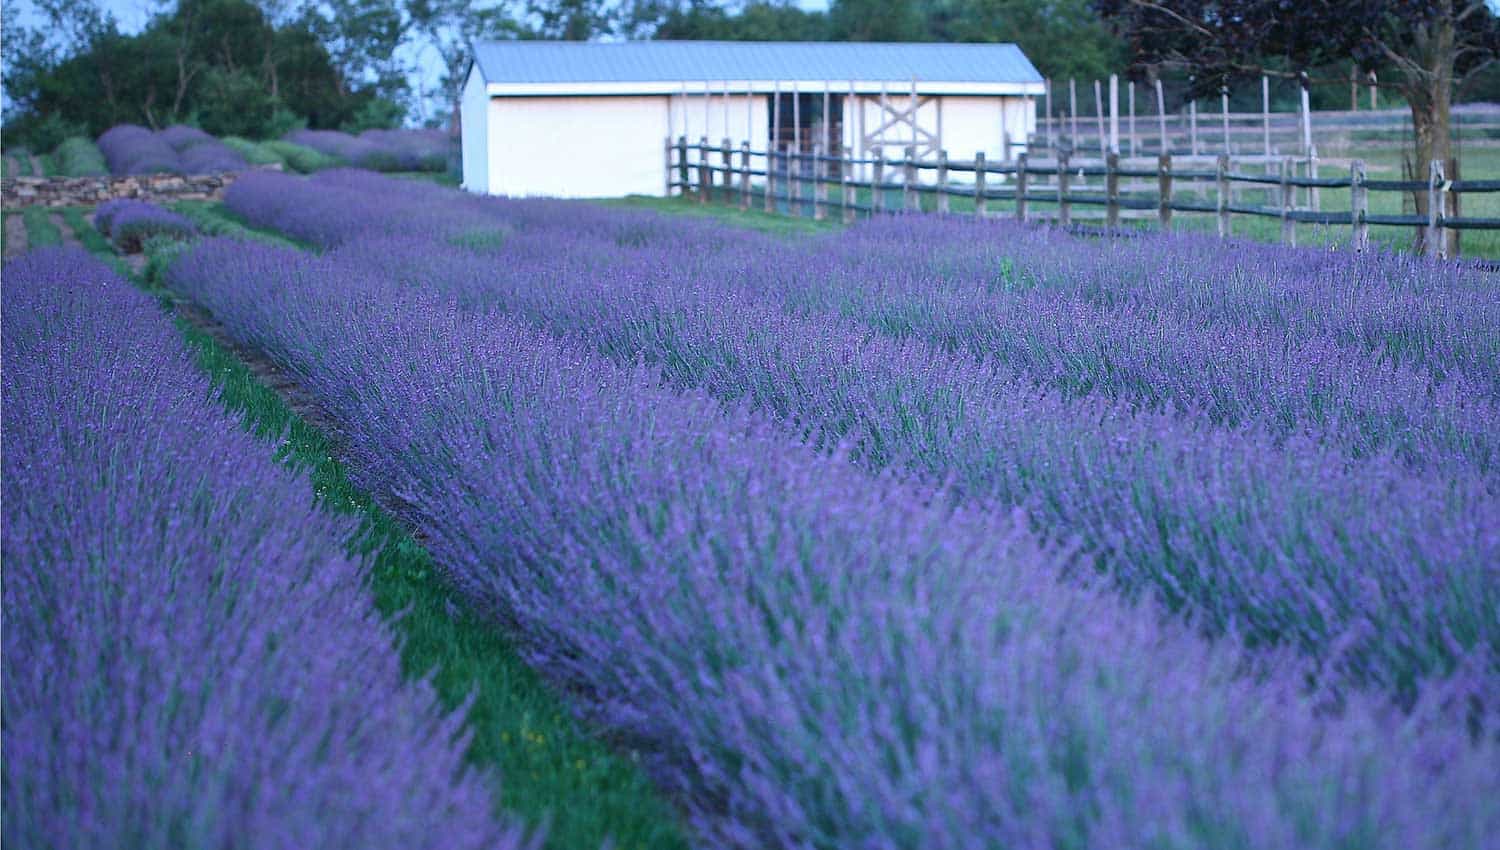 Rows of Phenomenol Lavender plants topped with purple spikes of flowers with a barn in the background